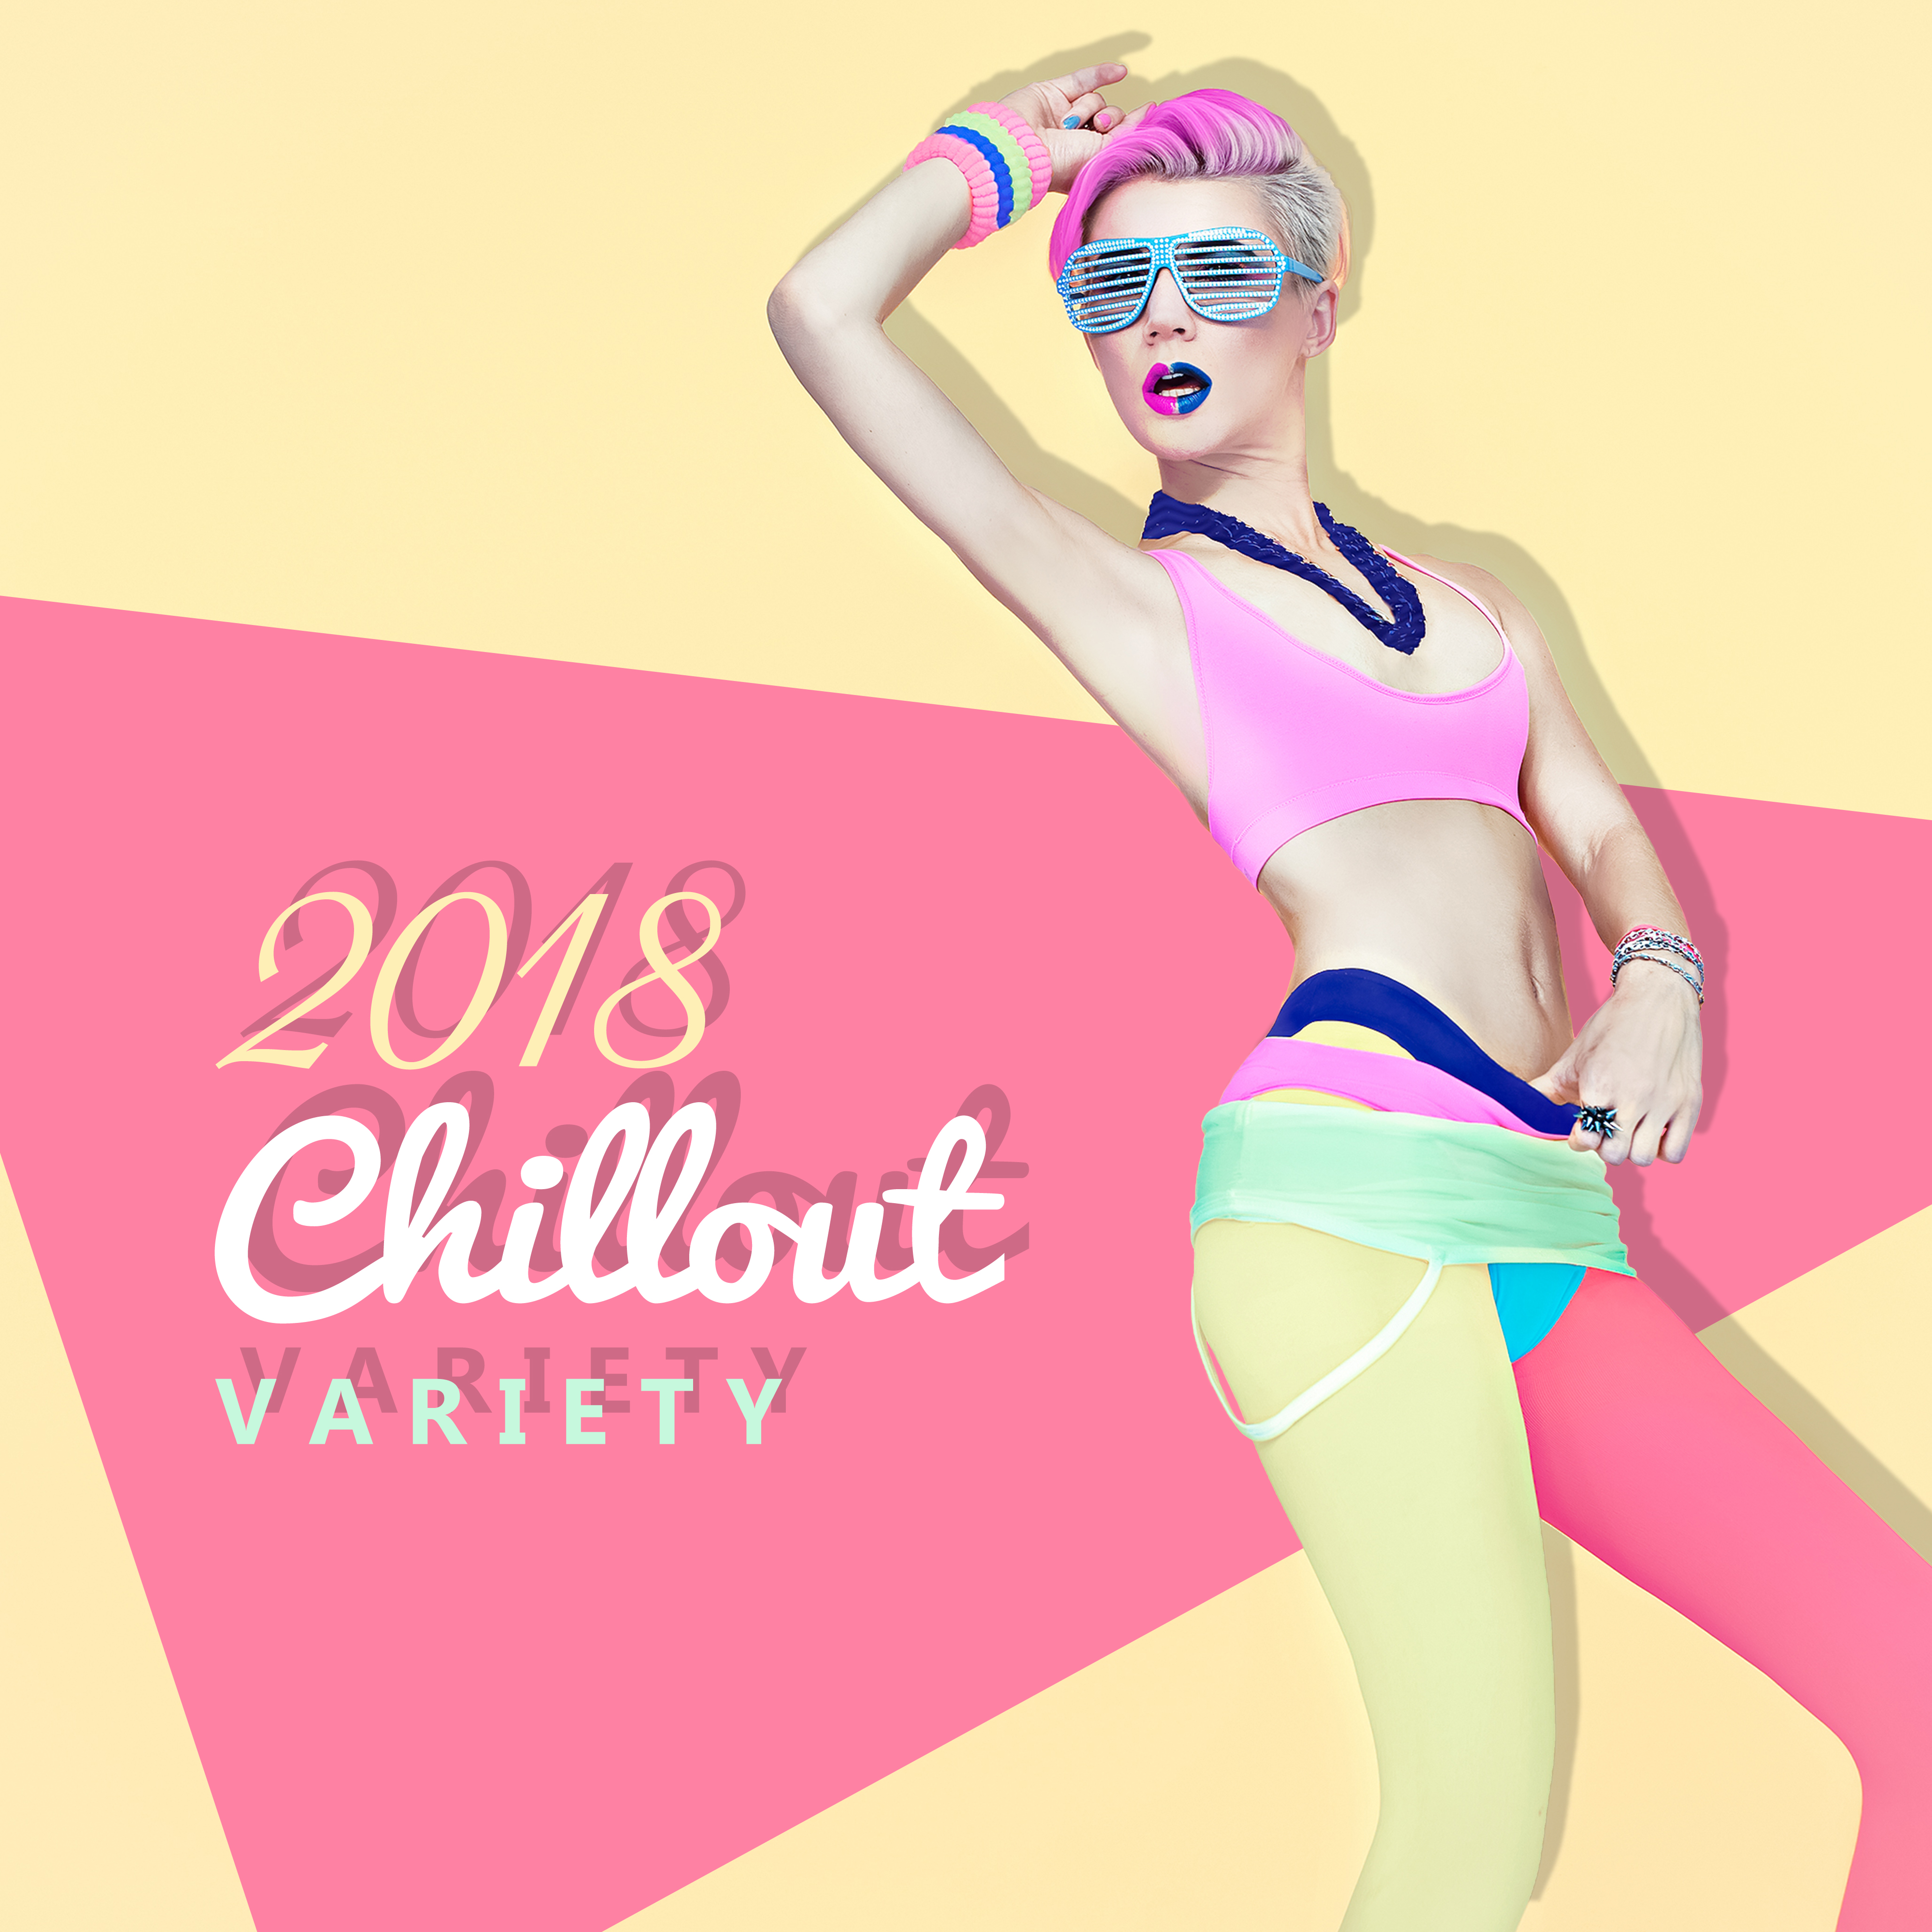 2018 Chillout Variety